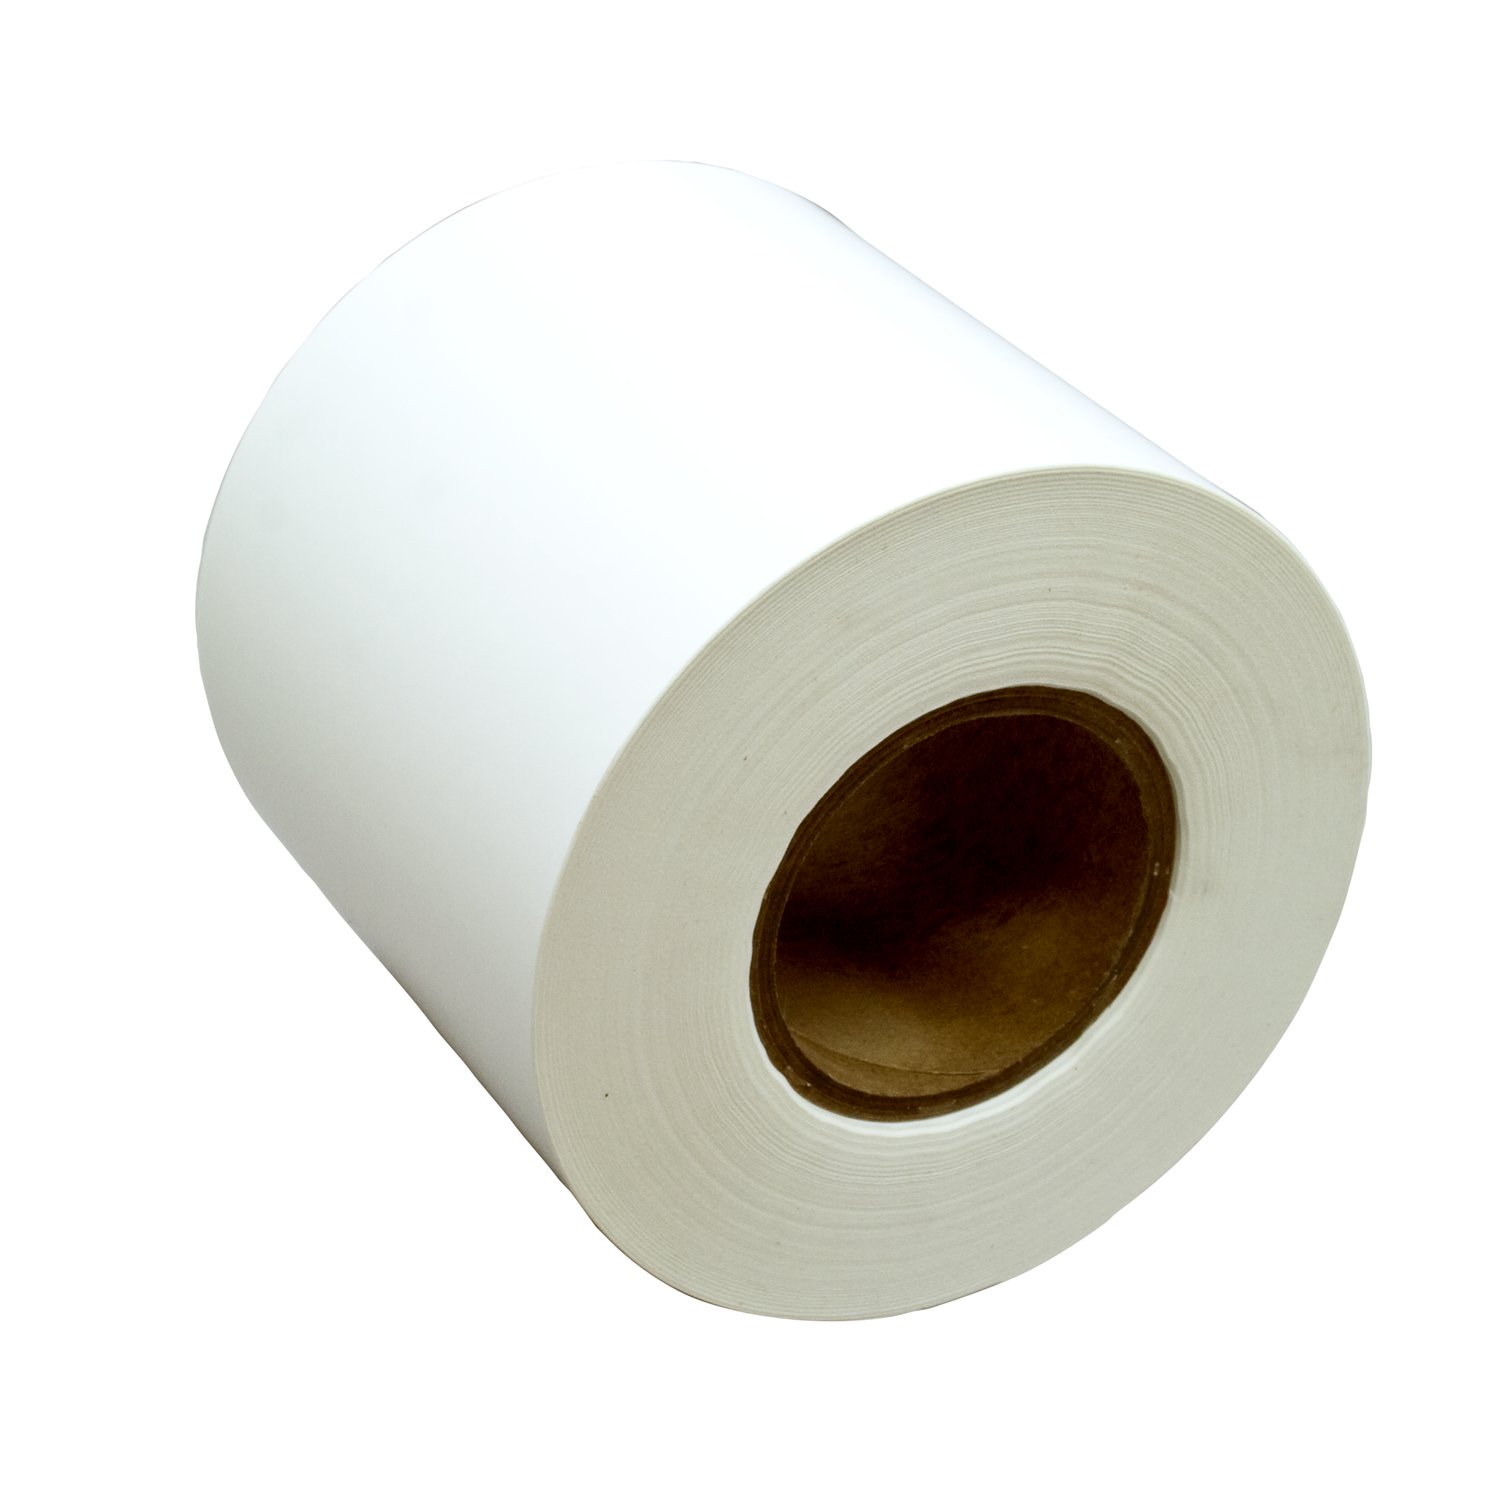 Wafer Paper 0.6mm - 20 Sheets Pack